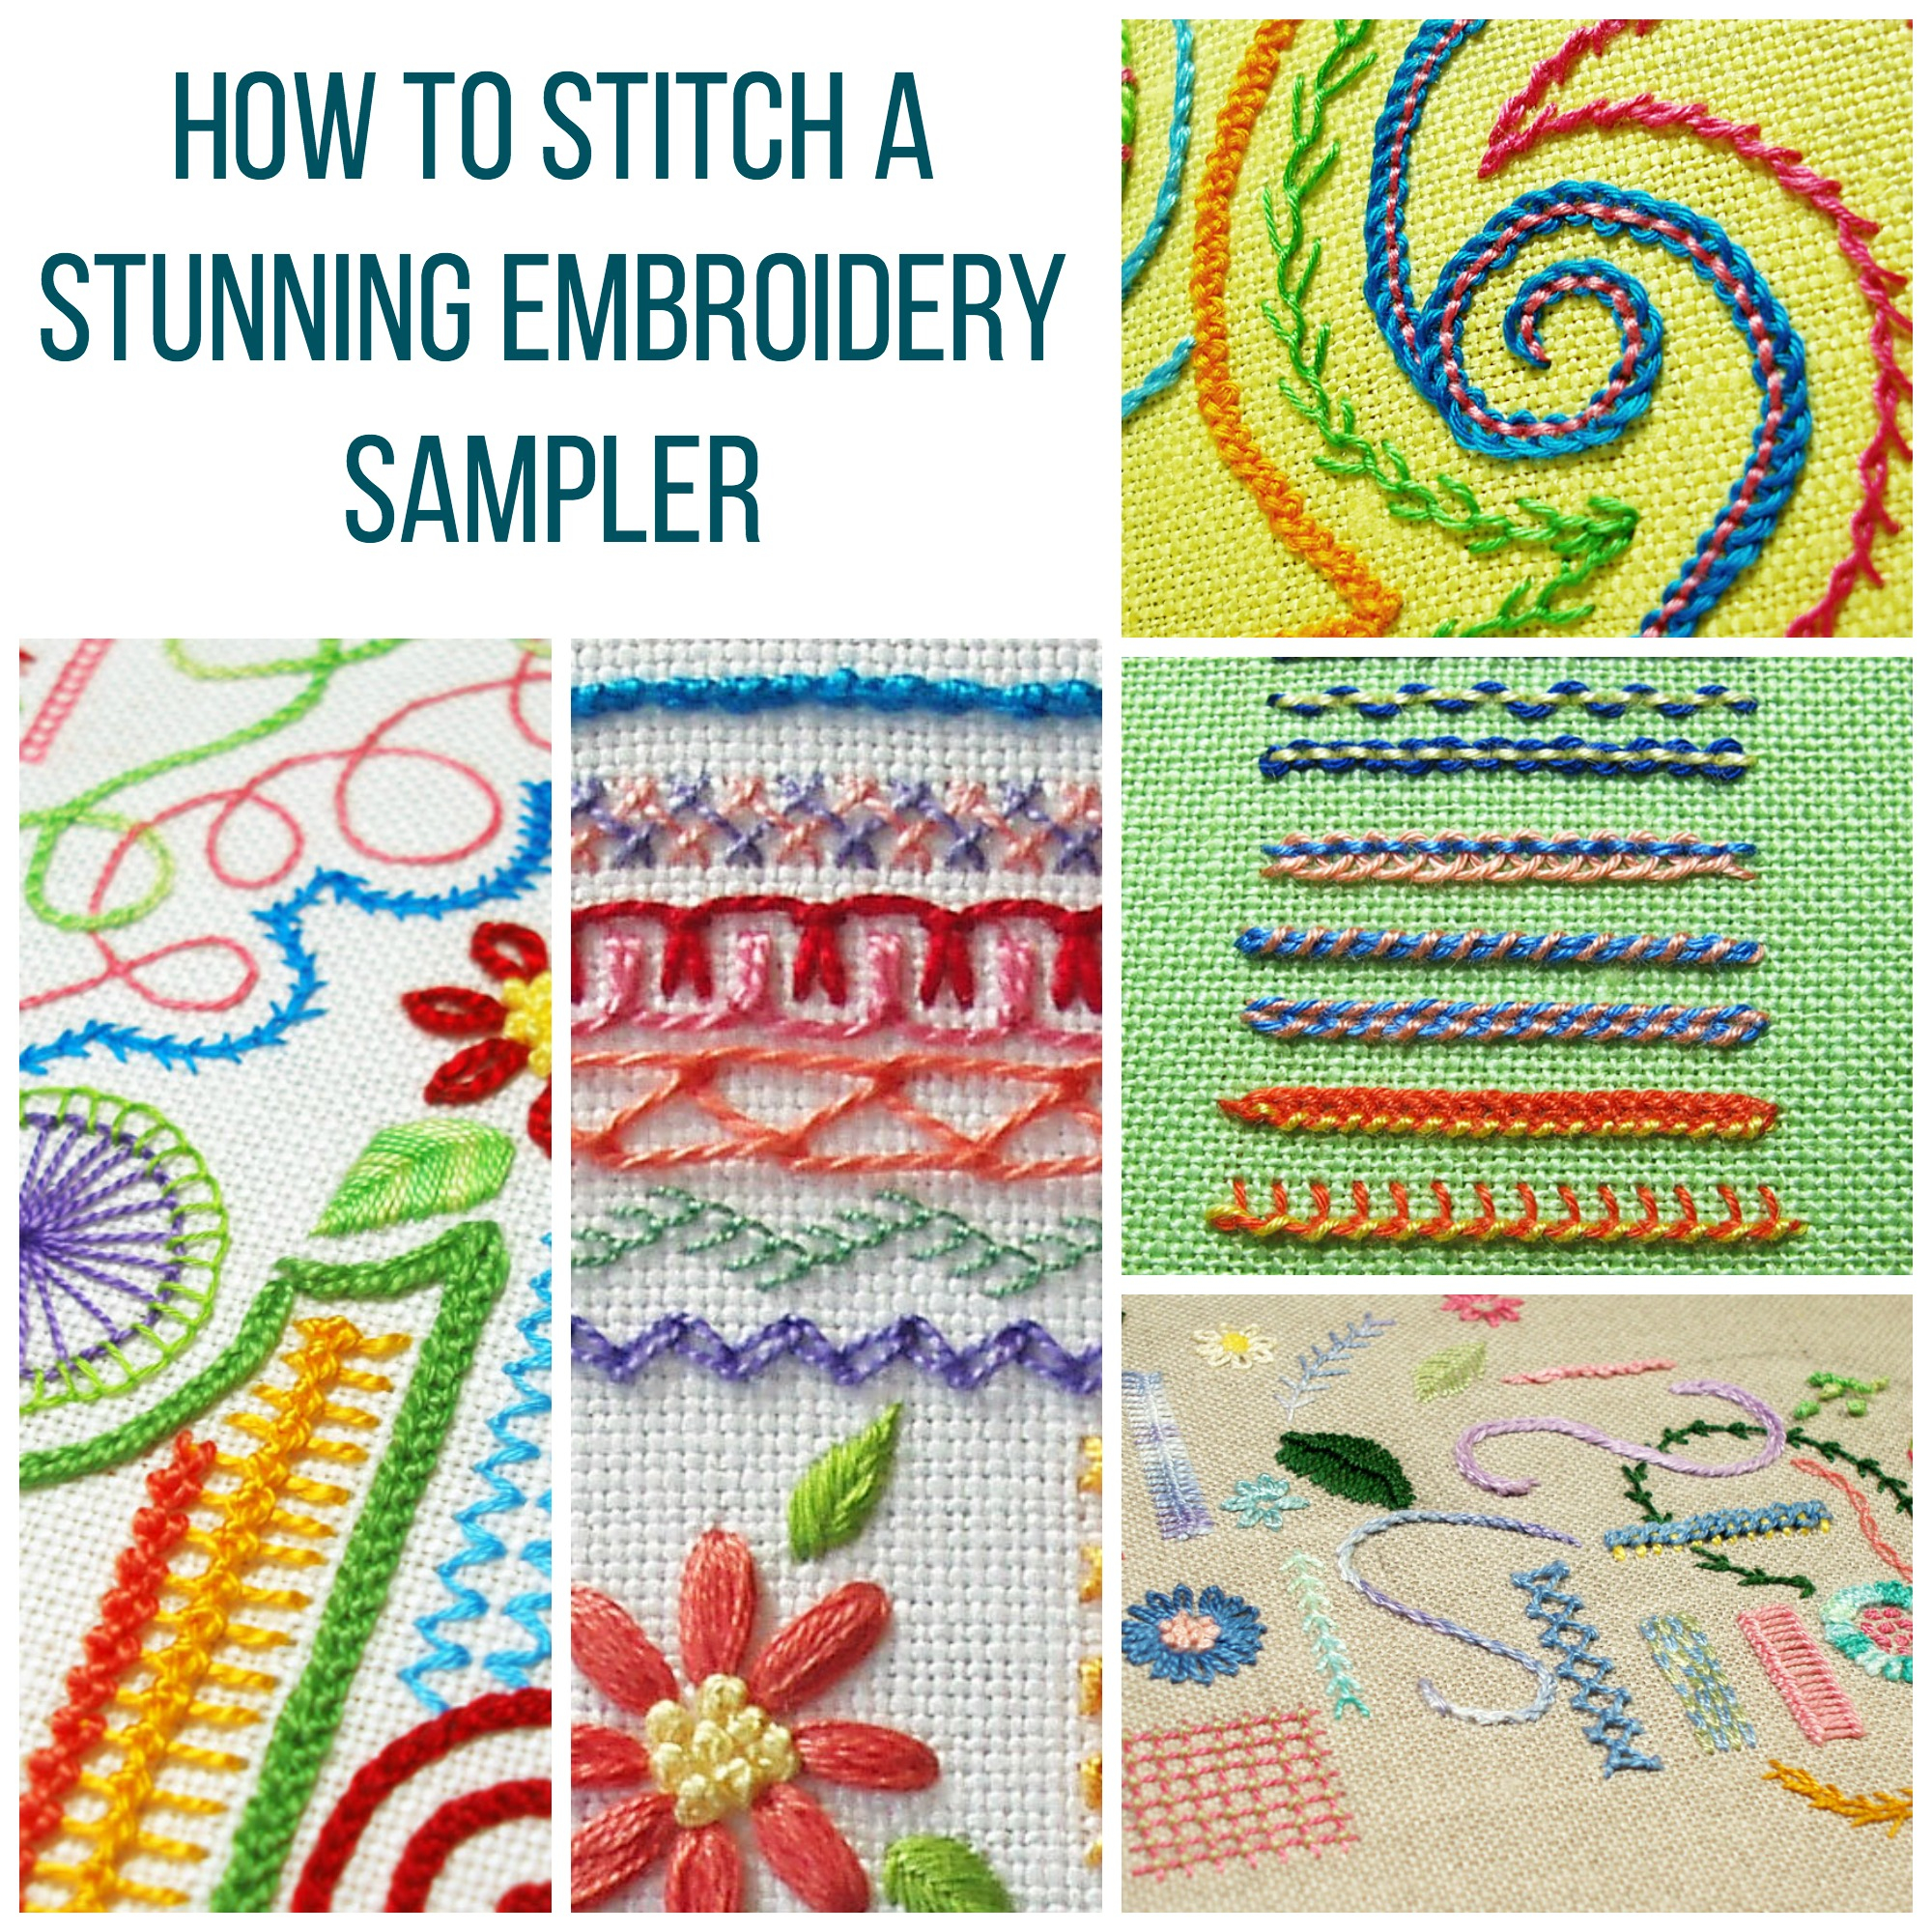 Embroidery Sampler Patterns Show Off Your Stitching With A Stunning Embroidery Sampler